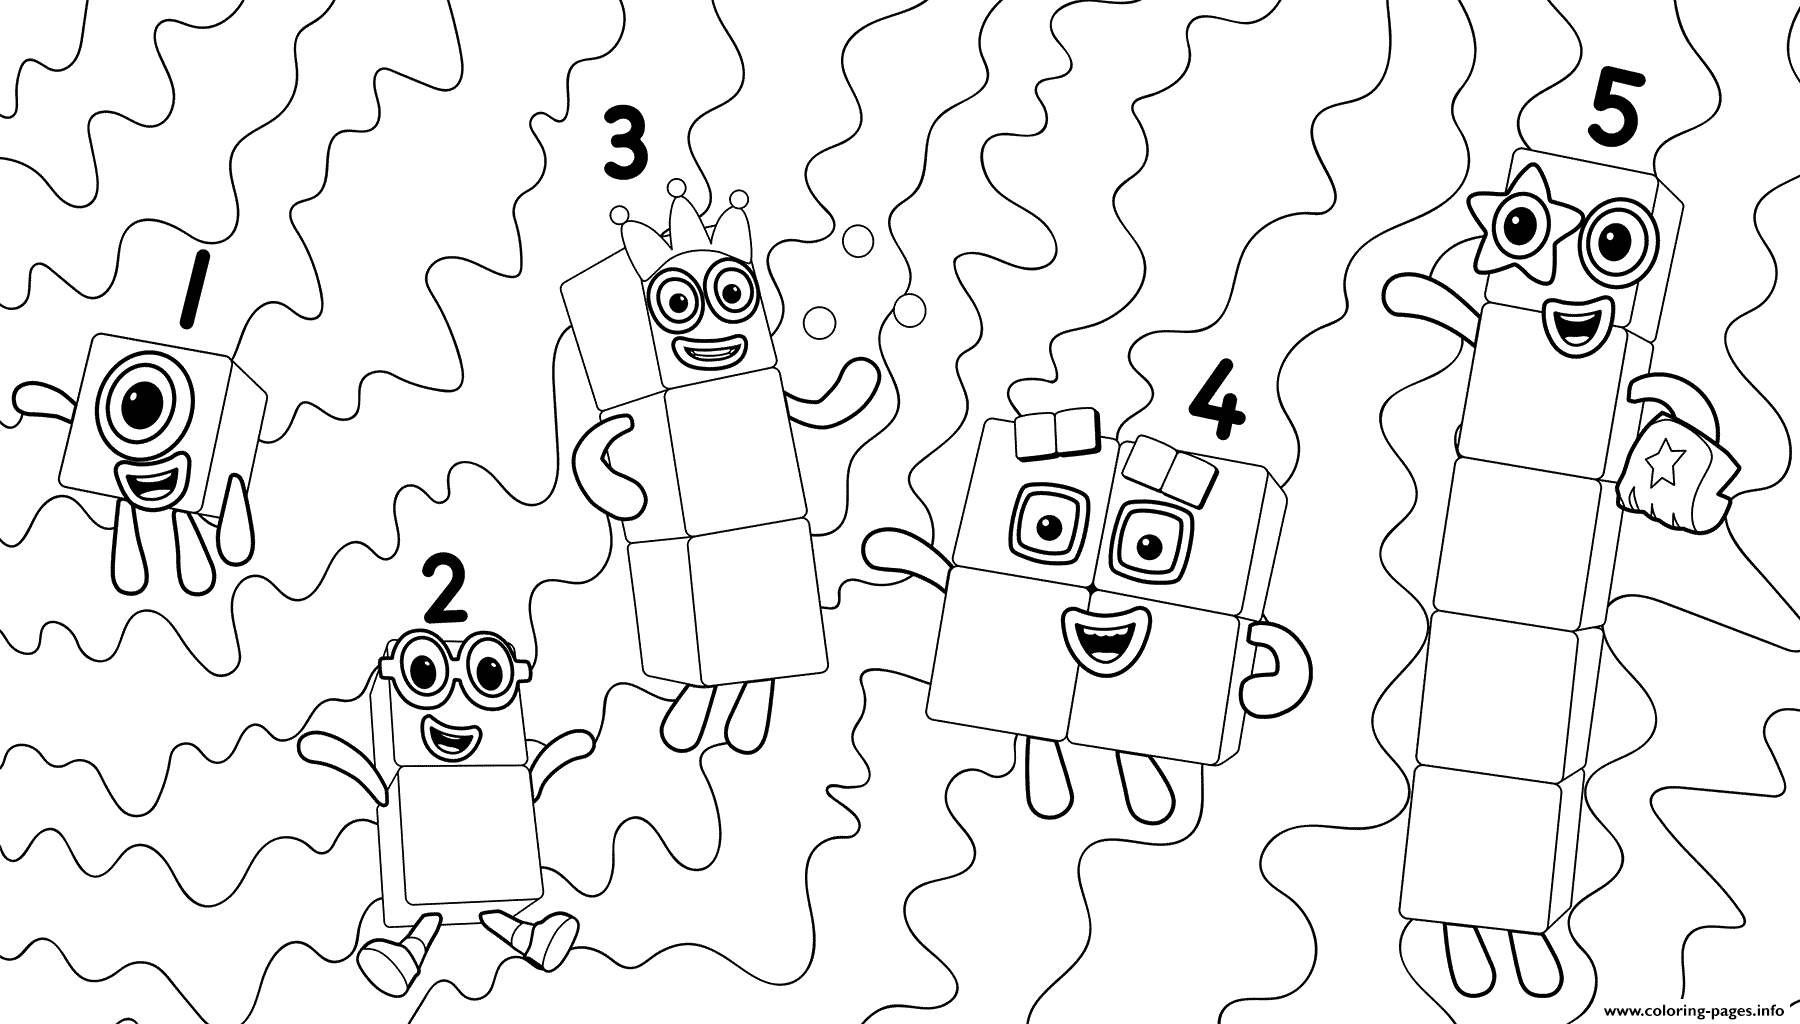 Free Printable Numberblocks Coloring Pages - Customize and Print